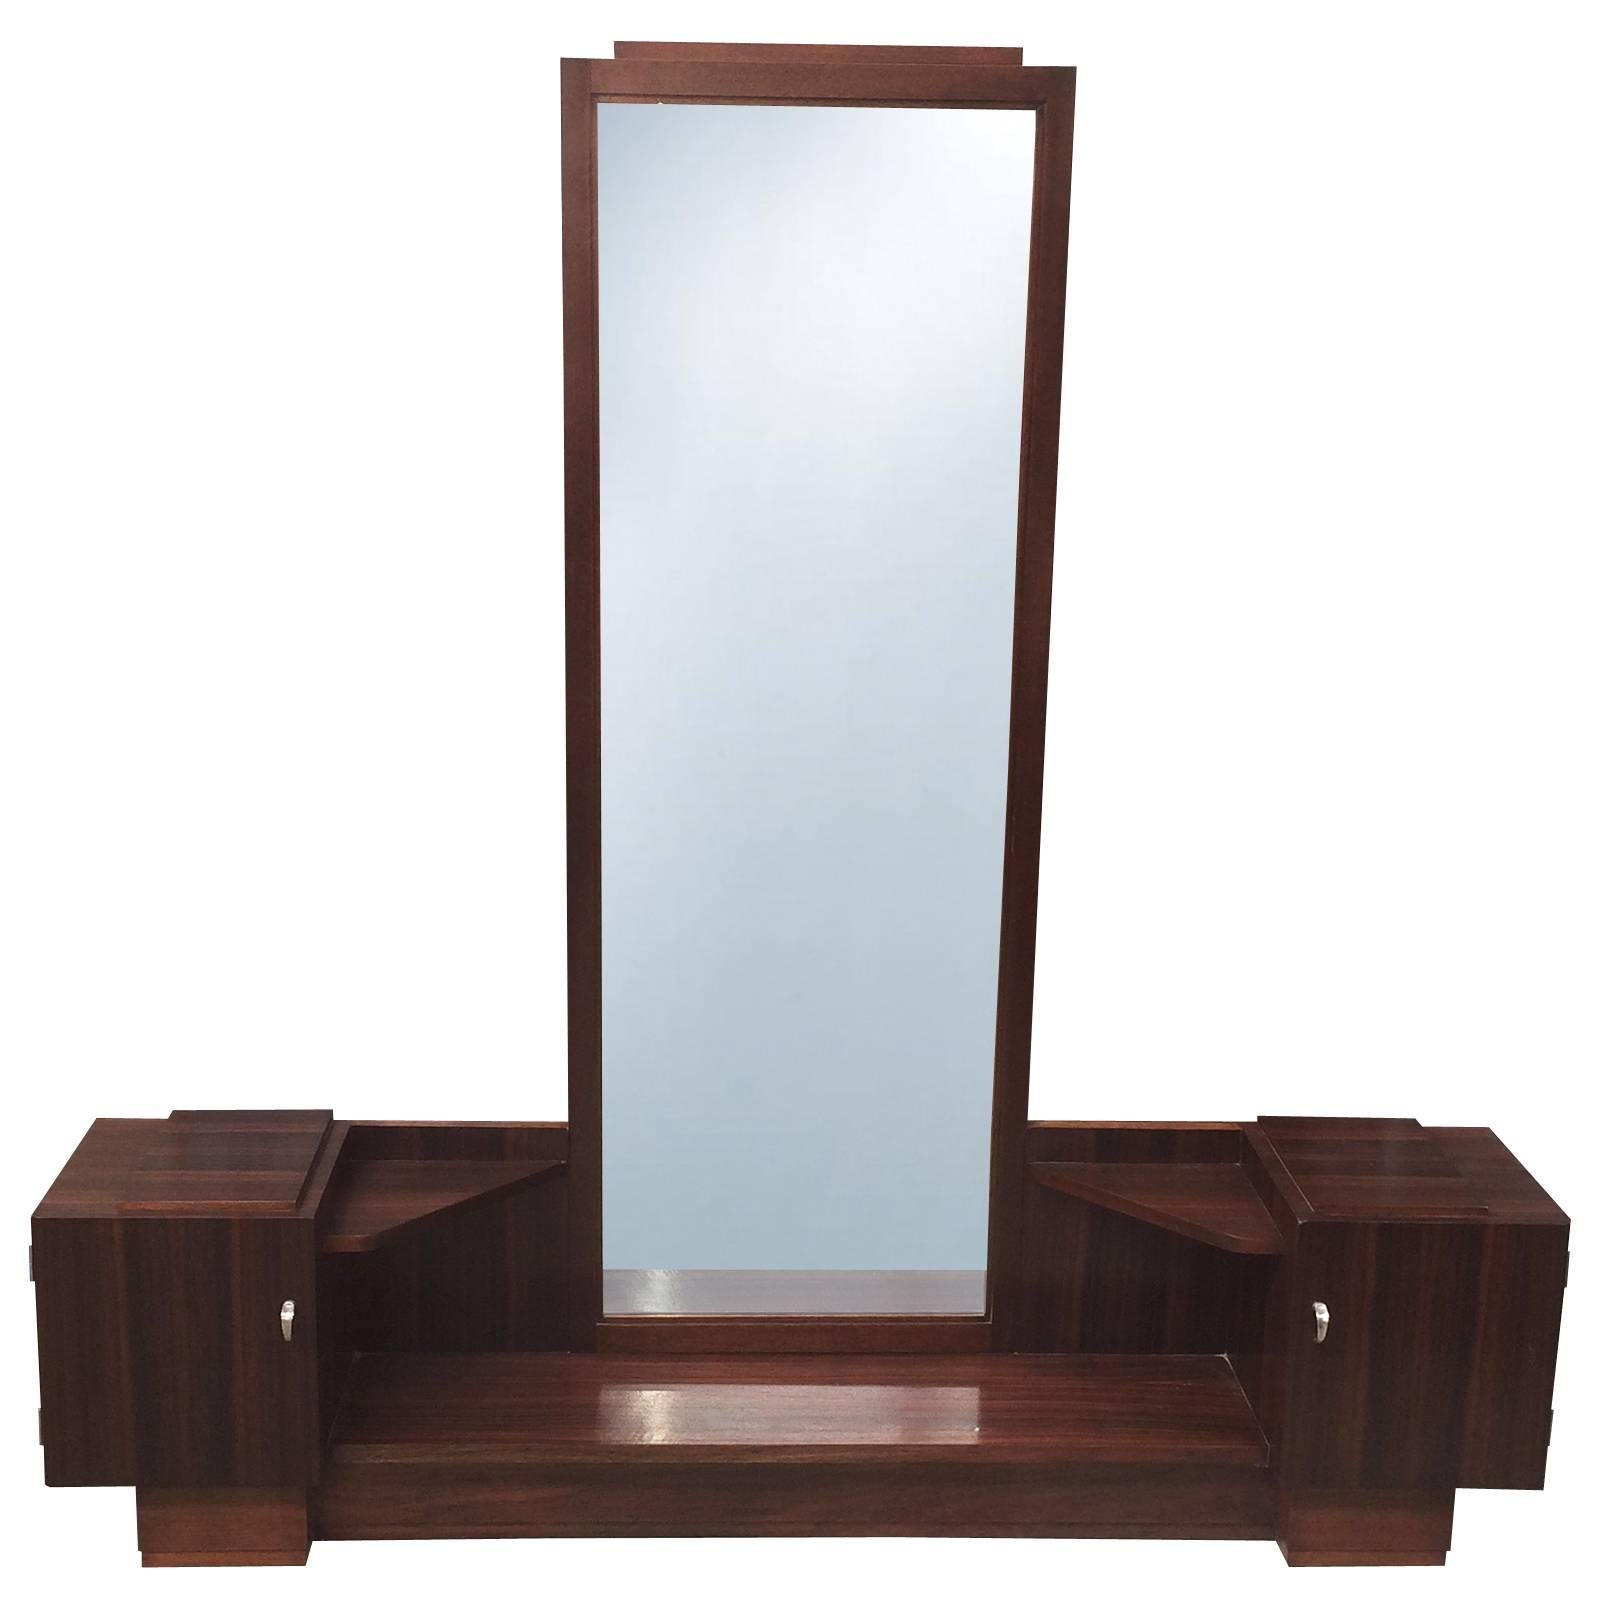 Art Deco Majorelle France dressing table, all in stunning French Macassar wood in vertically displayed grain to face and edges. This piece displays the branded, Majorelle Insignia to a discreet rear area near floor area.
The Dressing Table has a